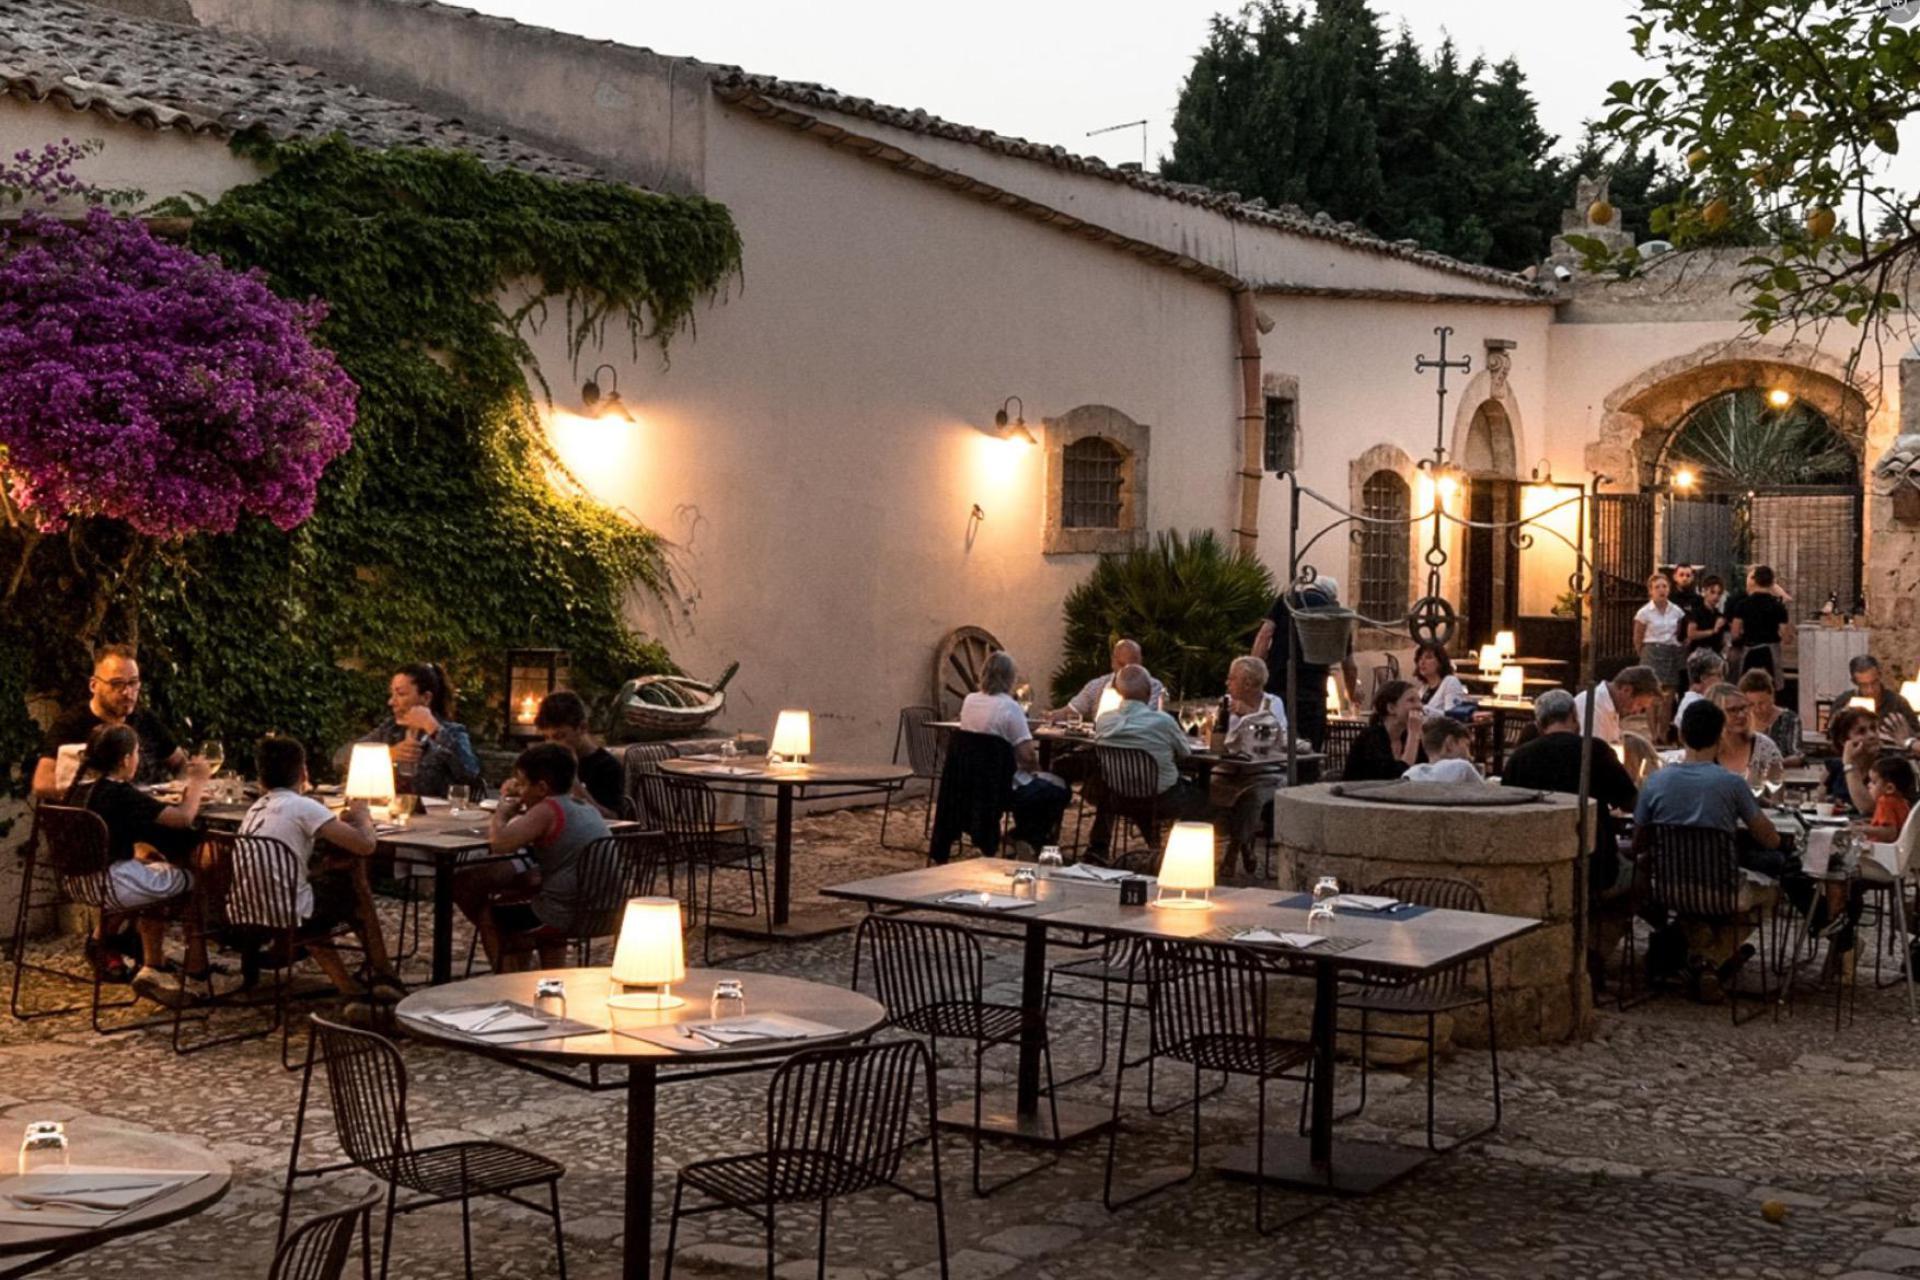 Authentic agriturismo with inner courtyard